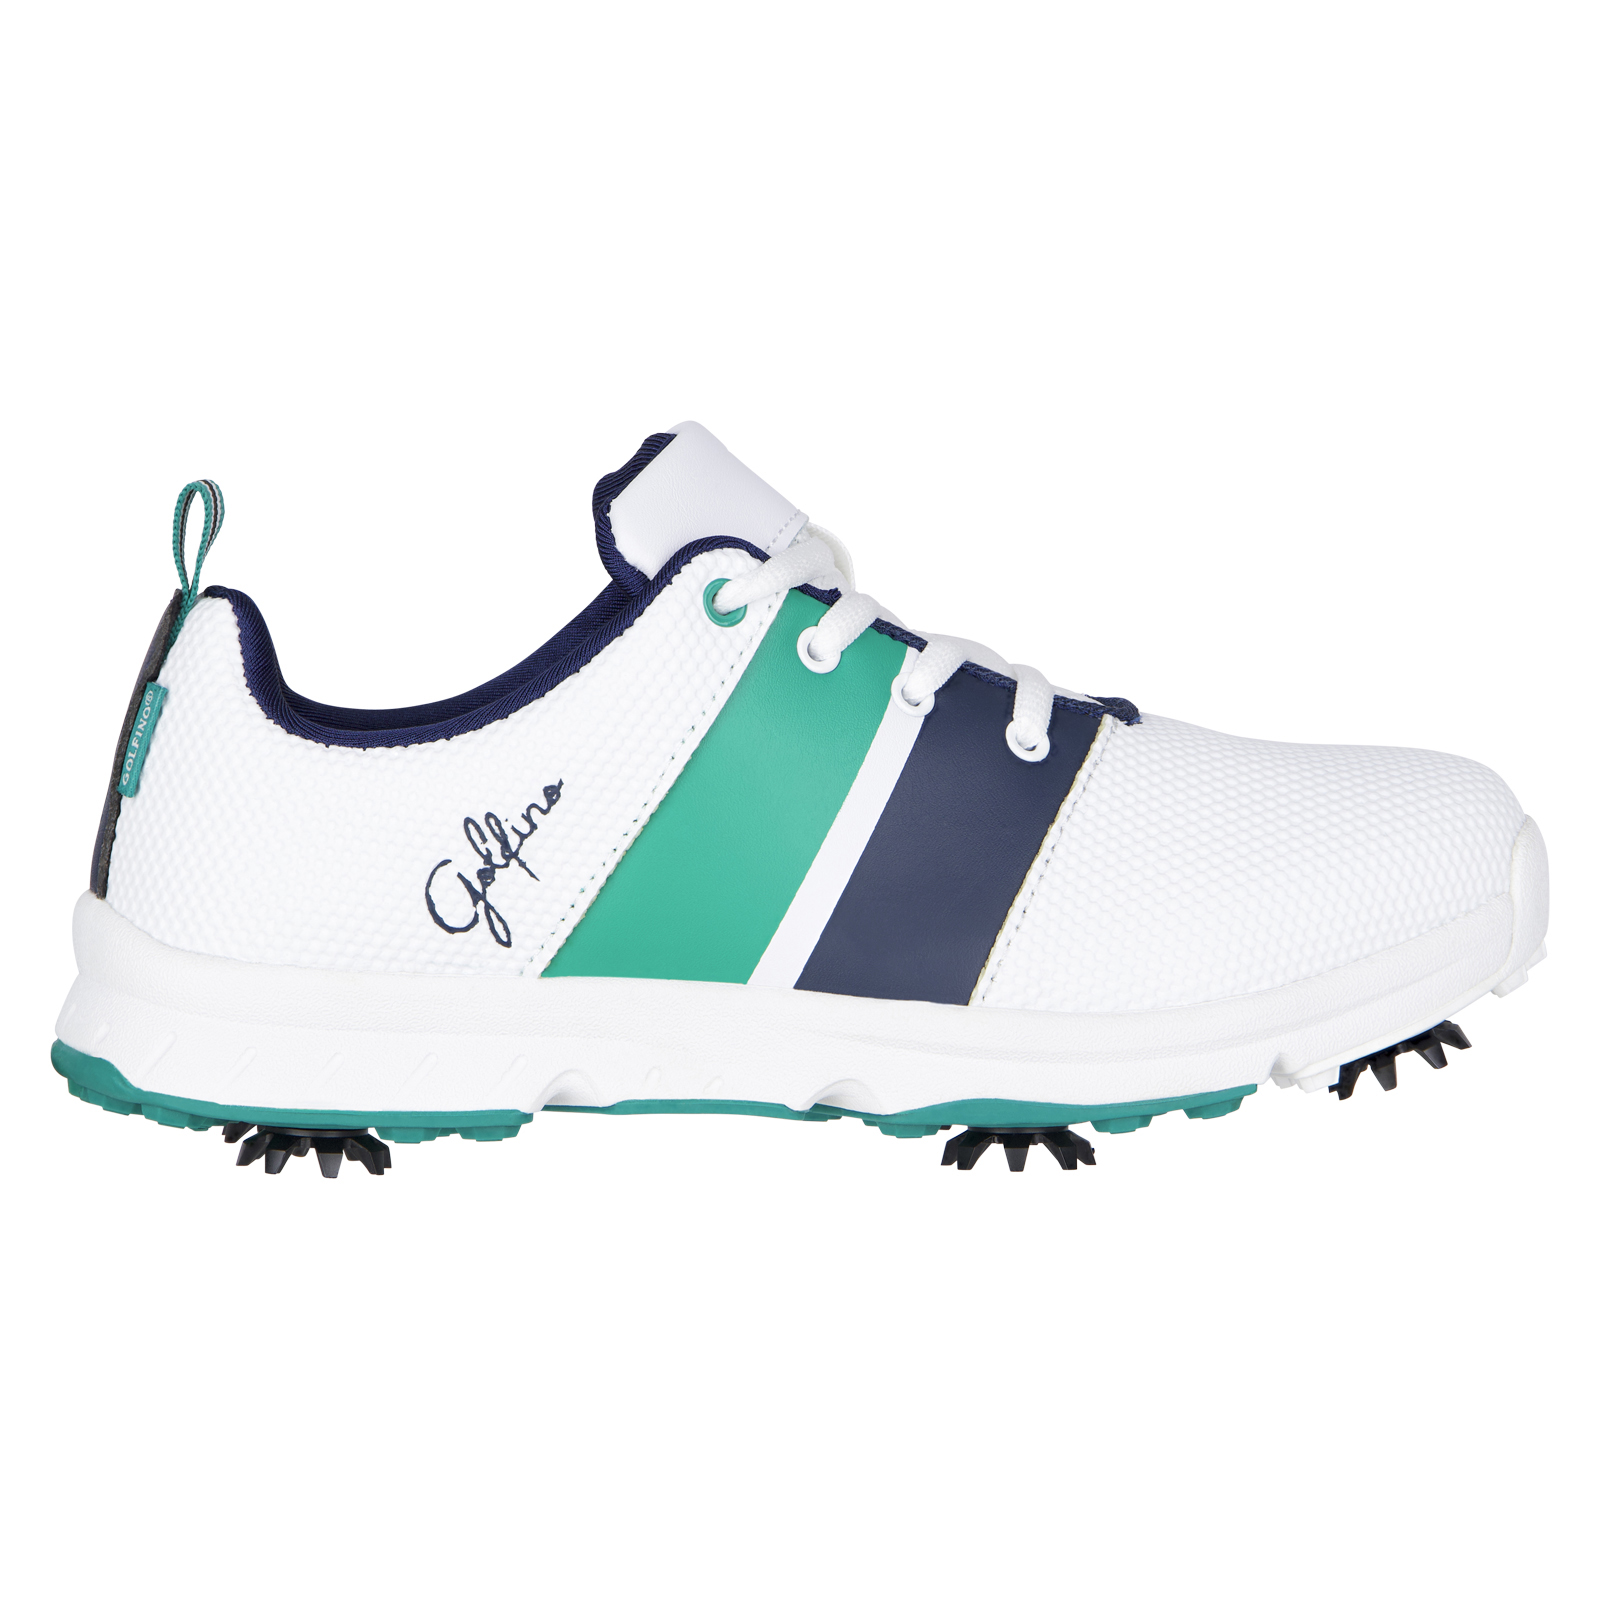 Ladies' waterproof golf shoes with spikes